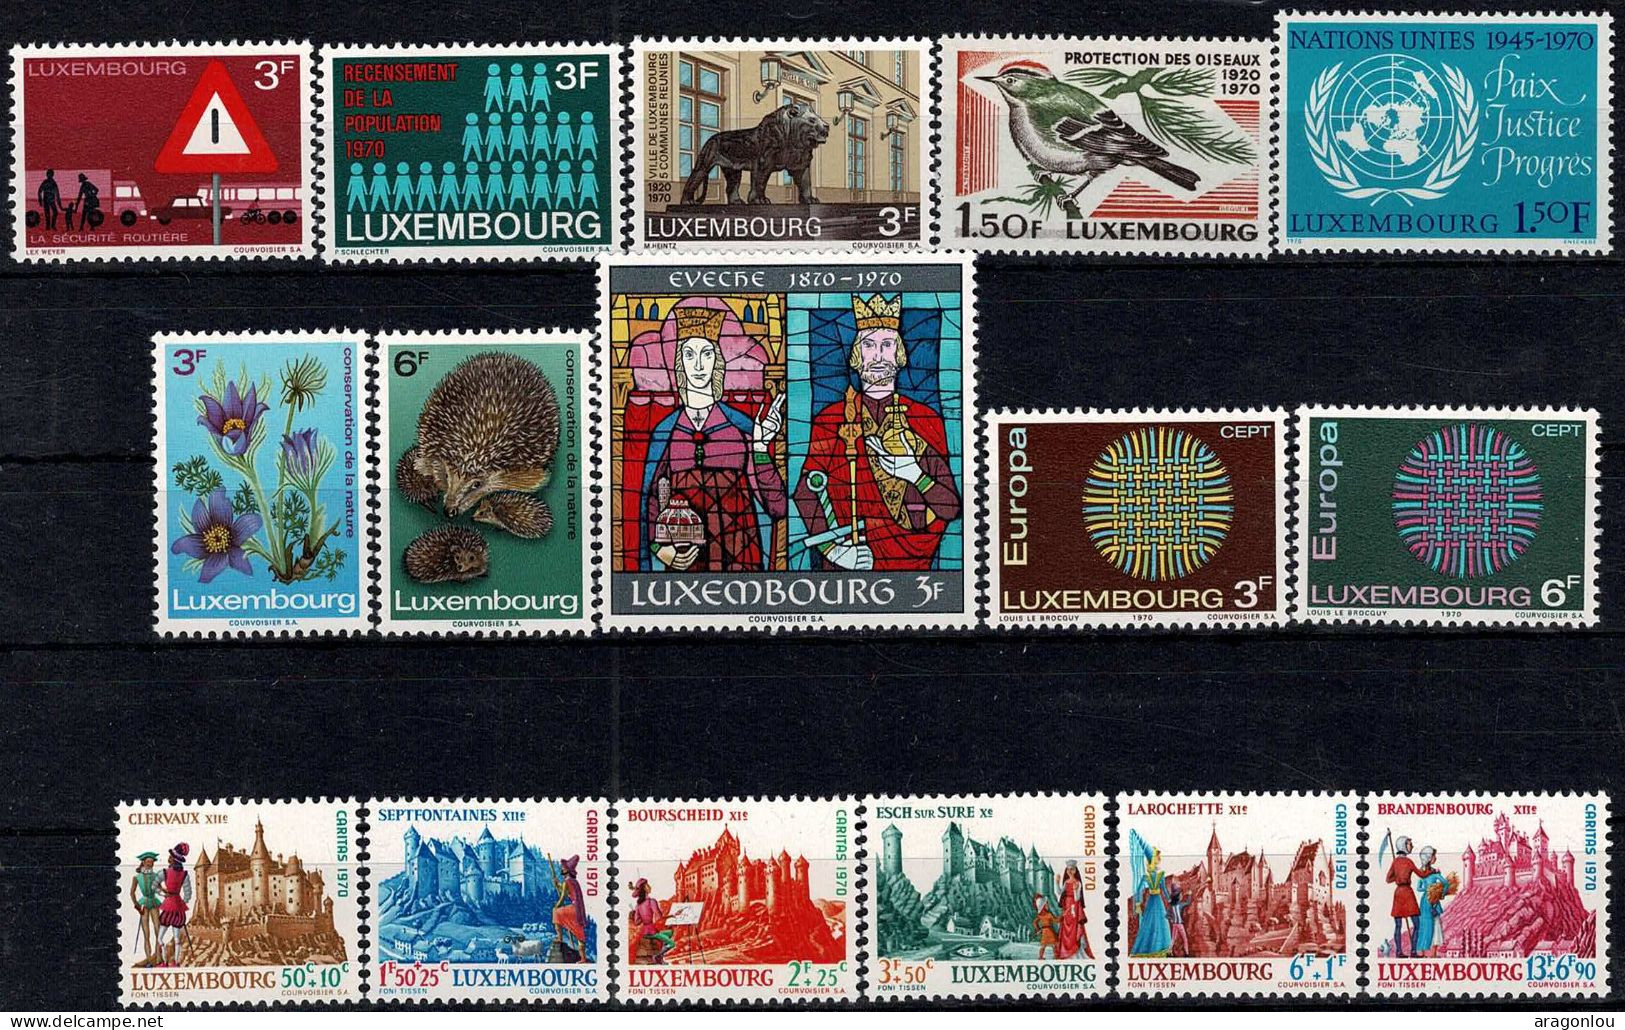 Luxembourg Luxemburg 1970 Année Complête 9 Séries Neuf MNH** - Annate Complete